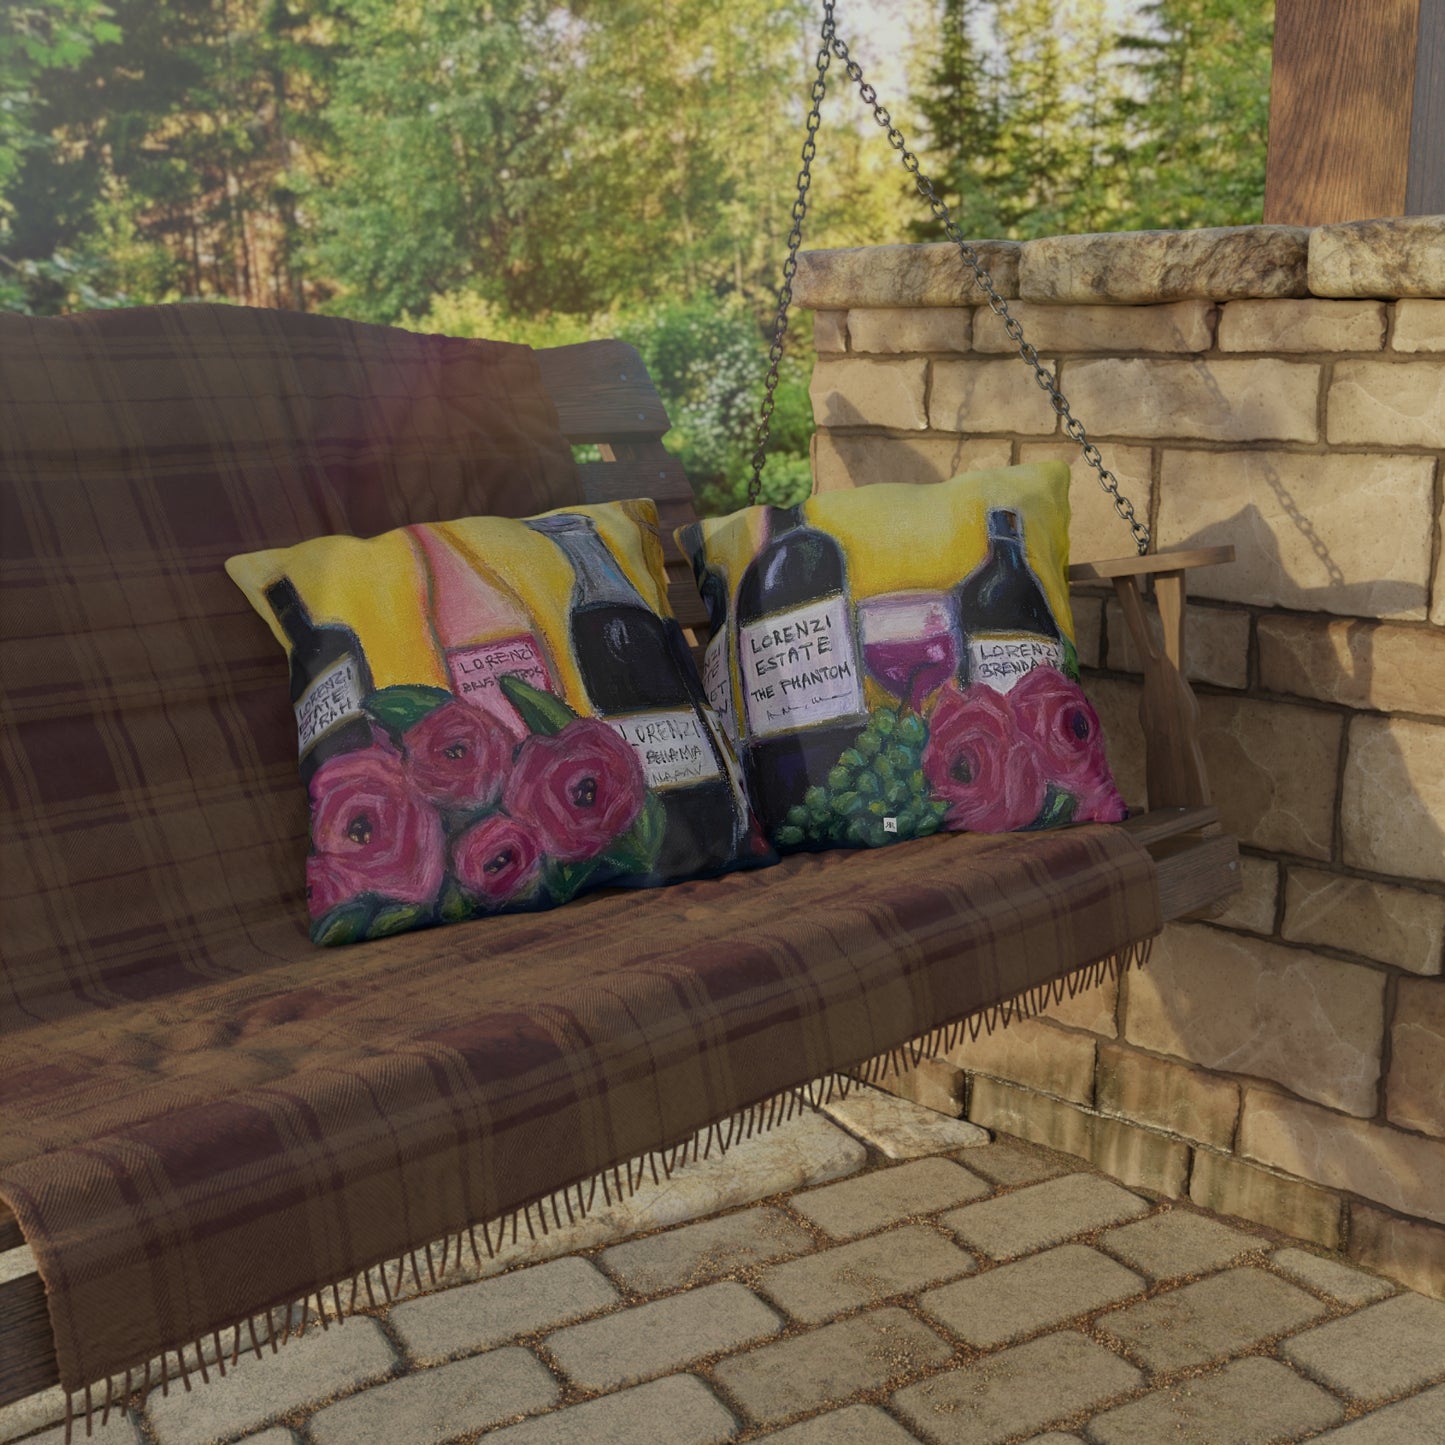 Lorenzi Estate Wine and Roses Outdoor Pillows